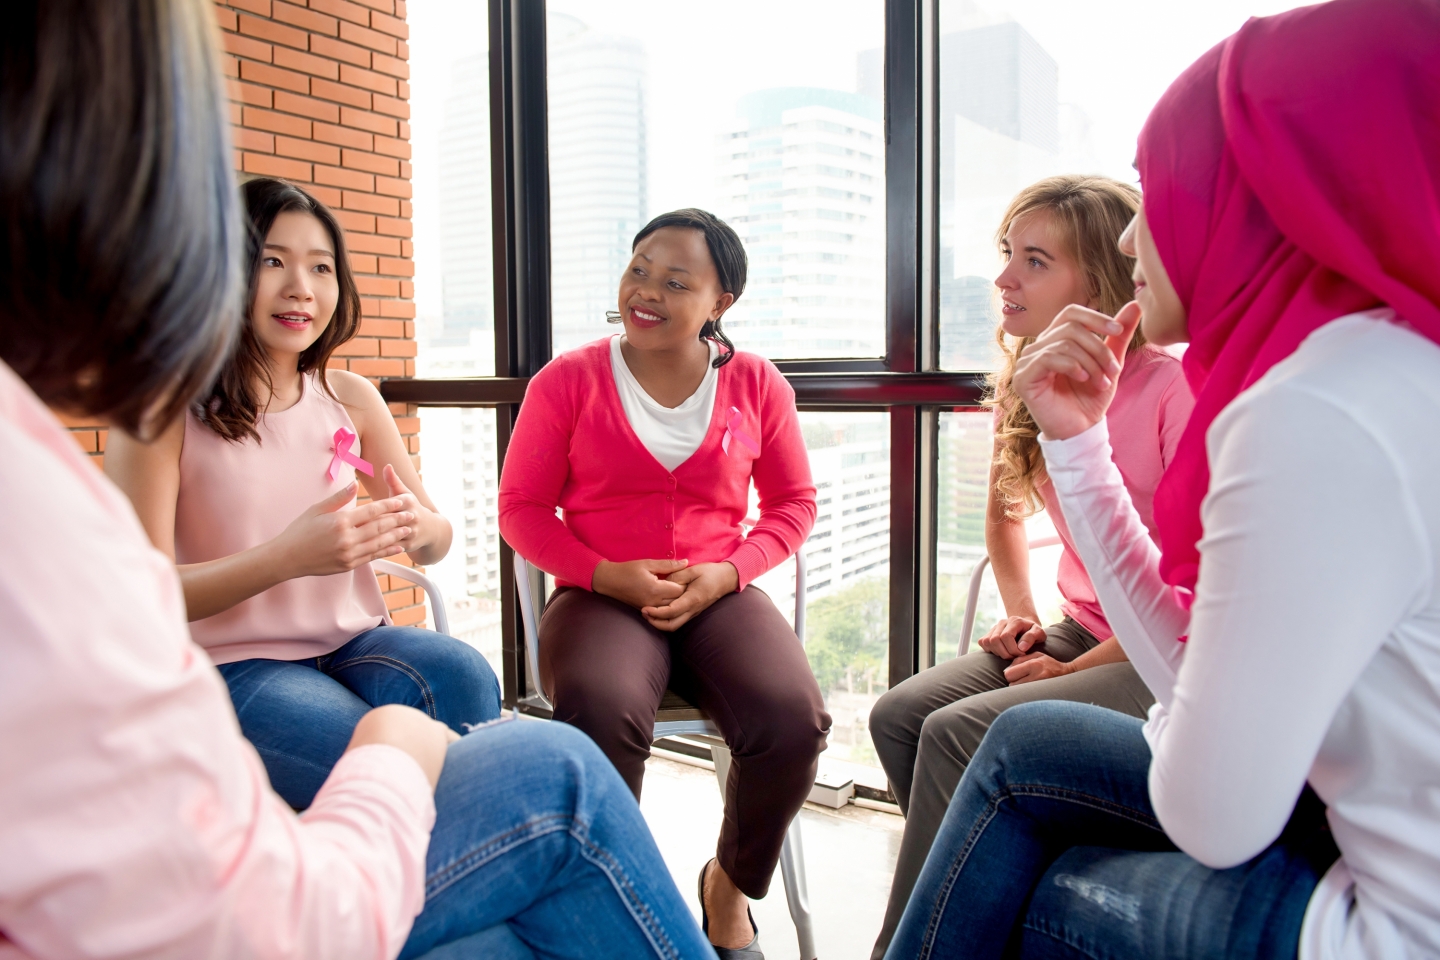 Stock photo of breast cancer patients in a group discussion